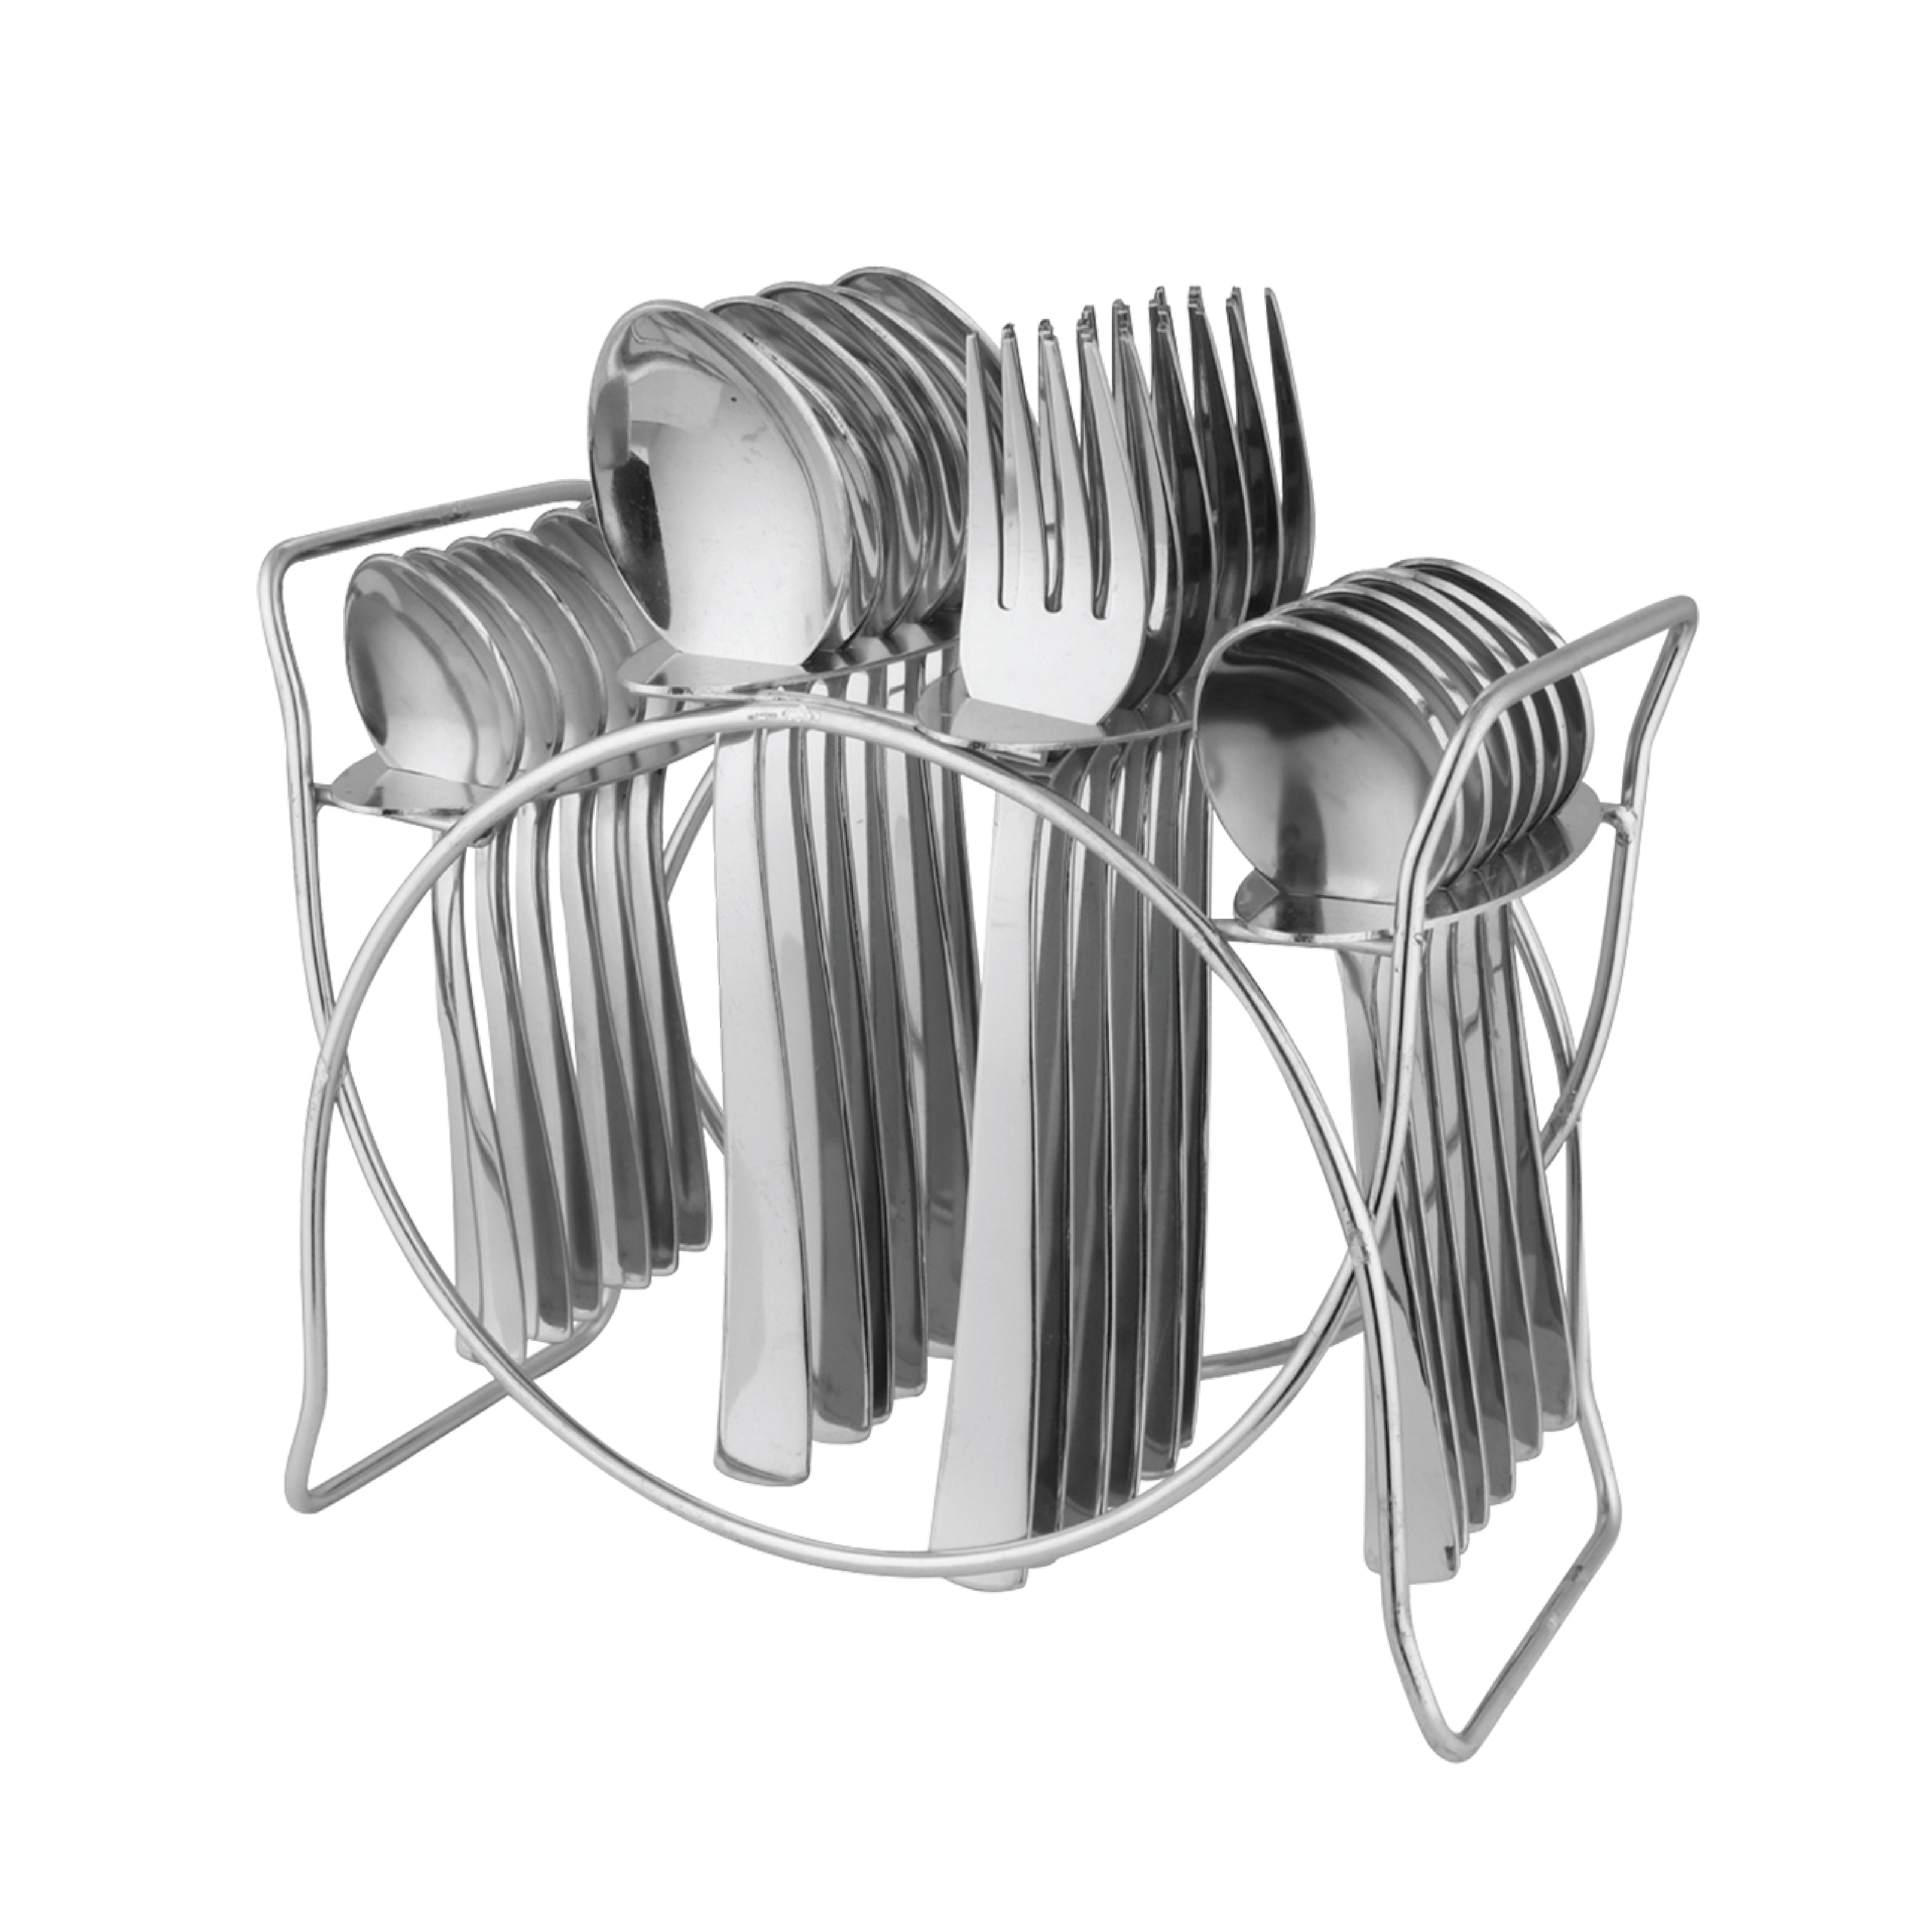 KOWS Lily cutlery set (SCS001)